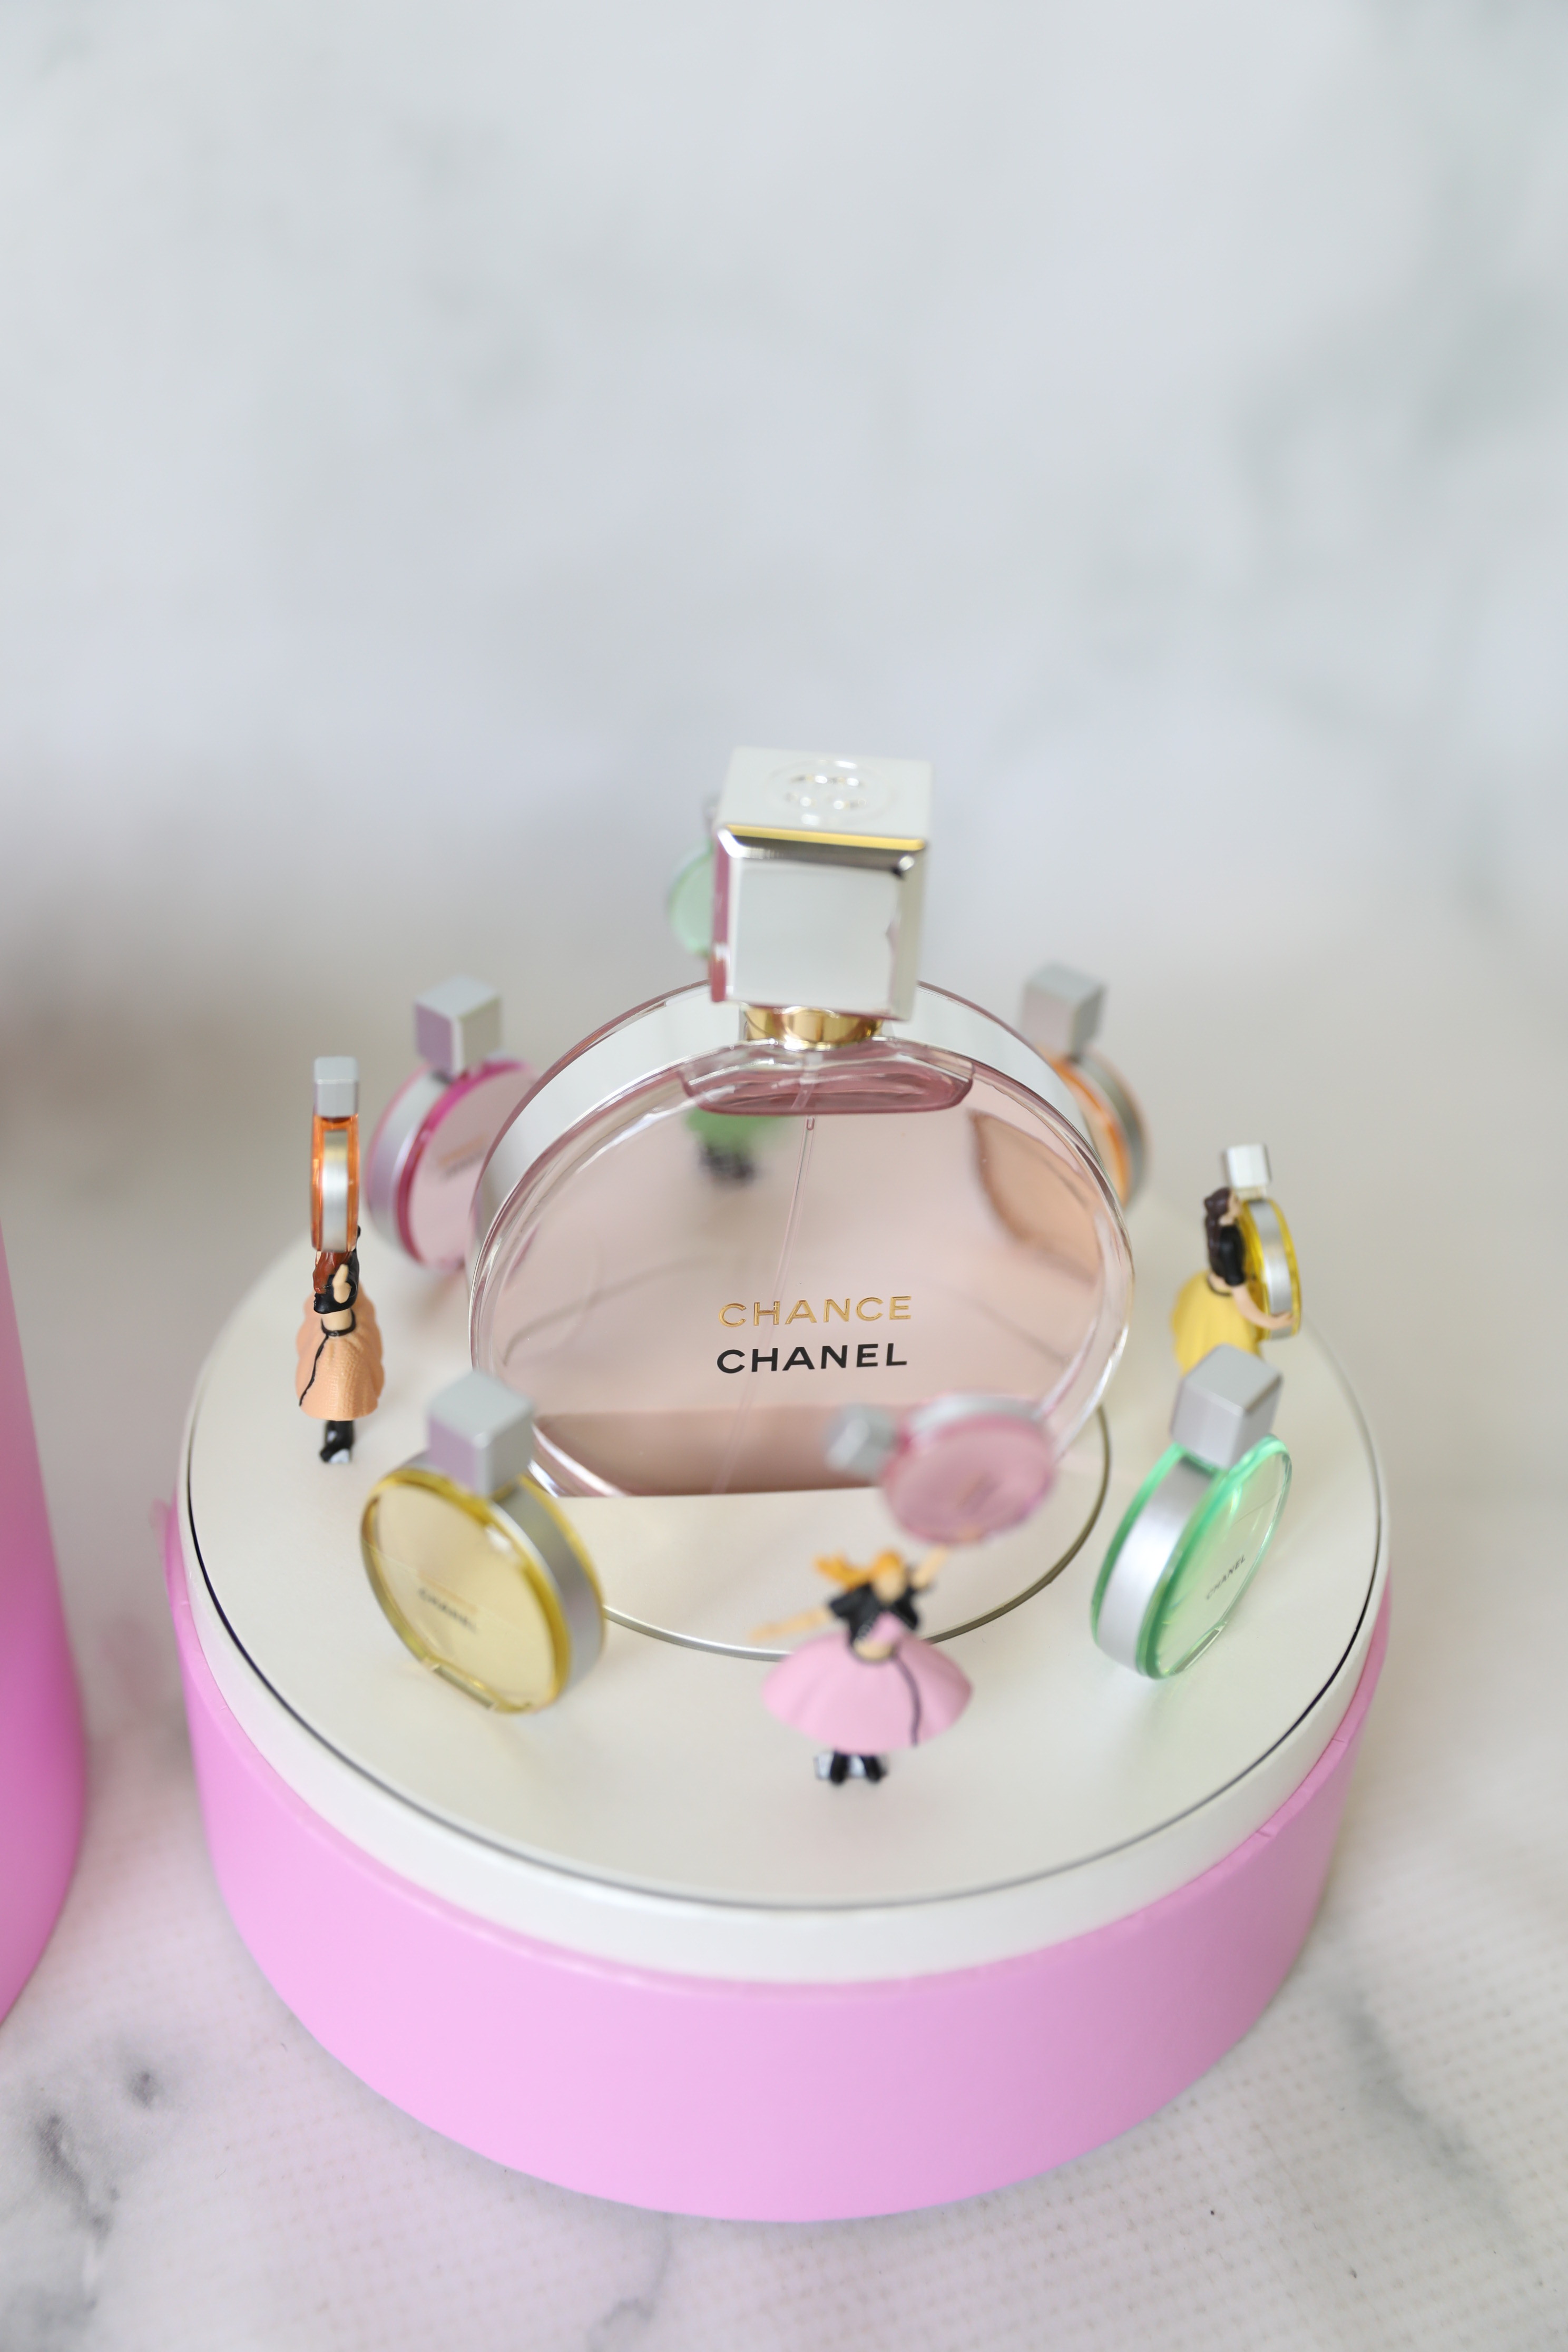 Exclusive First Look At The CHANEL Chance Eau Tendre Limited